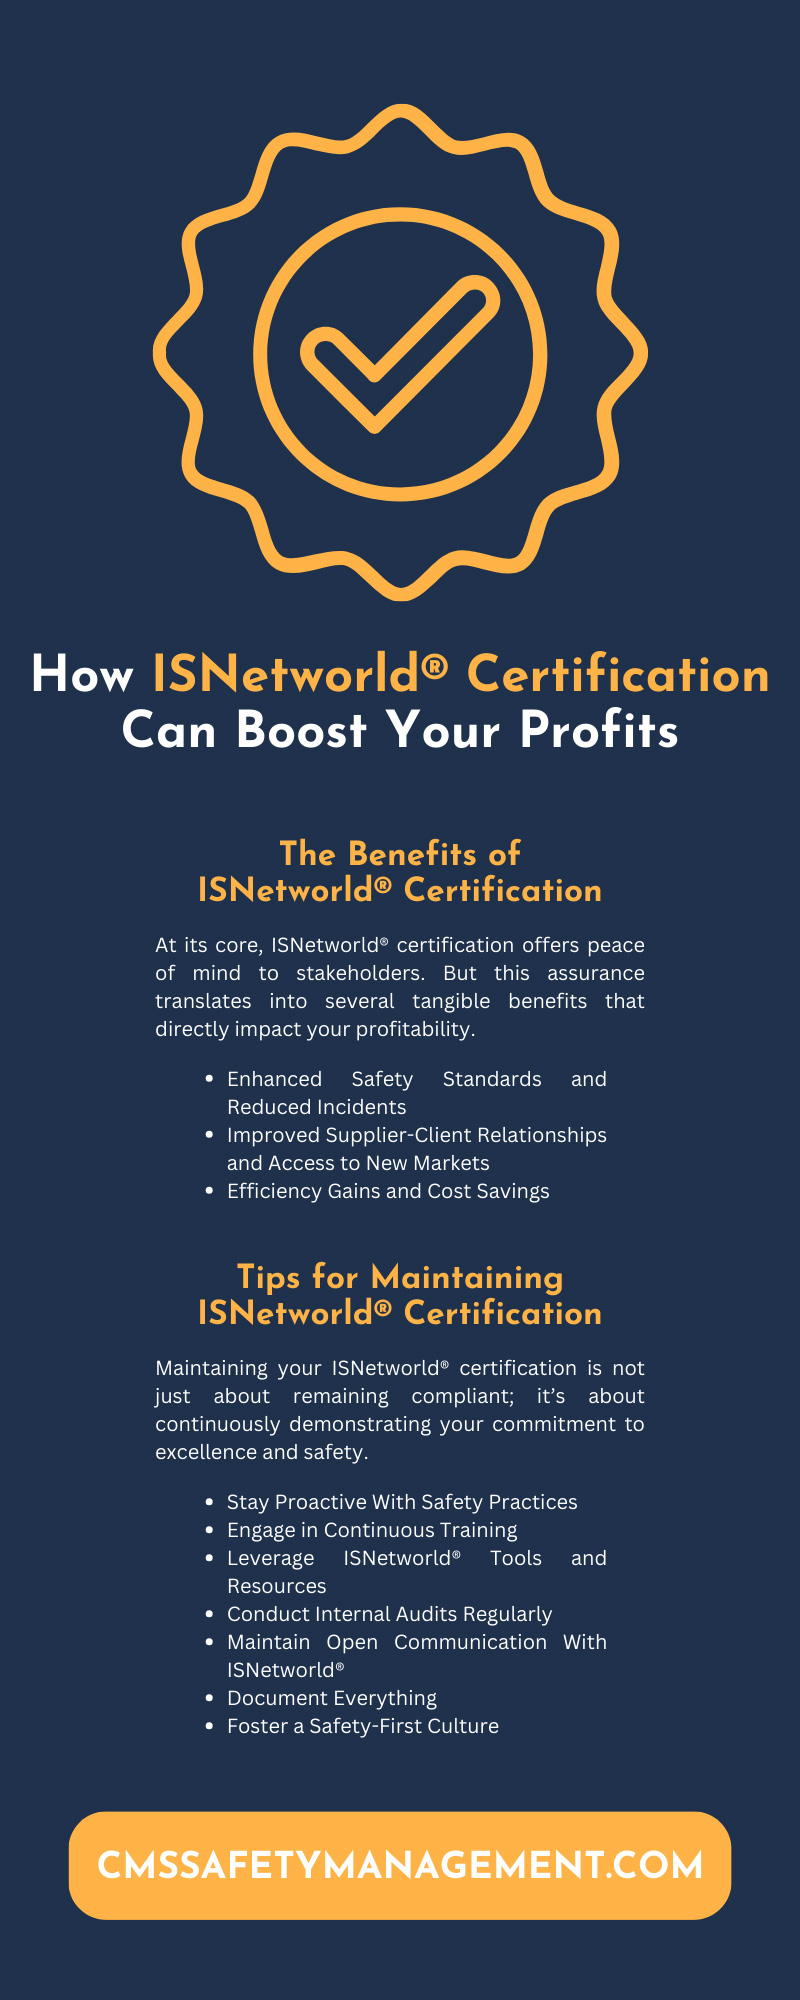 How ISNetworld® Certification Can Boost Your Profits
